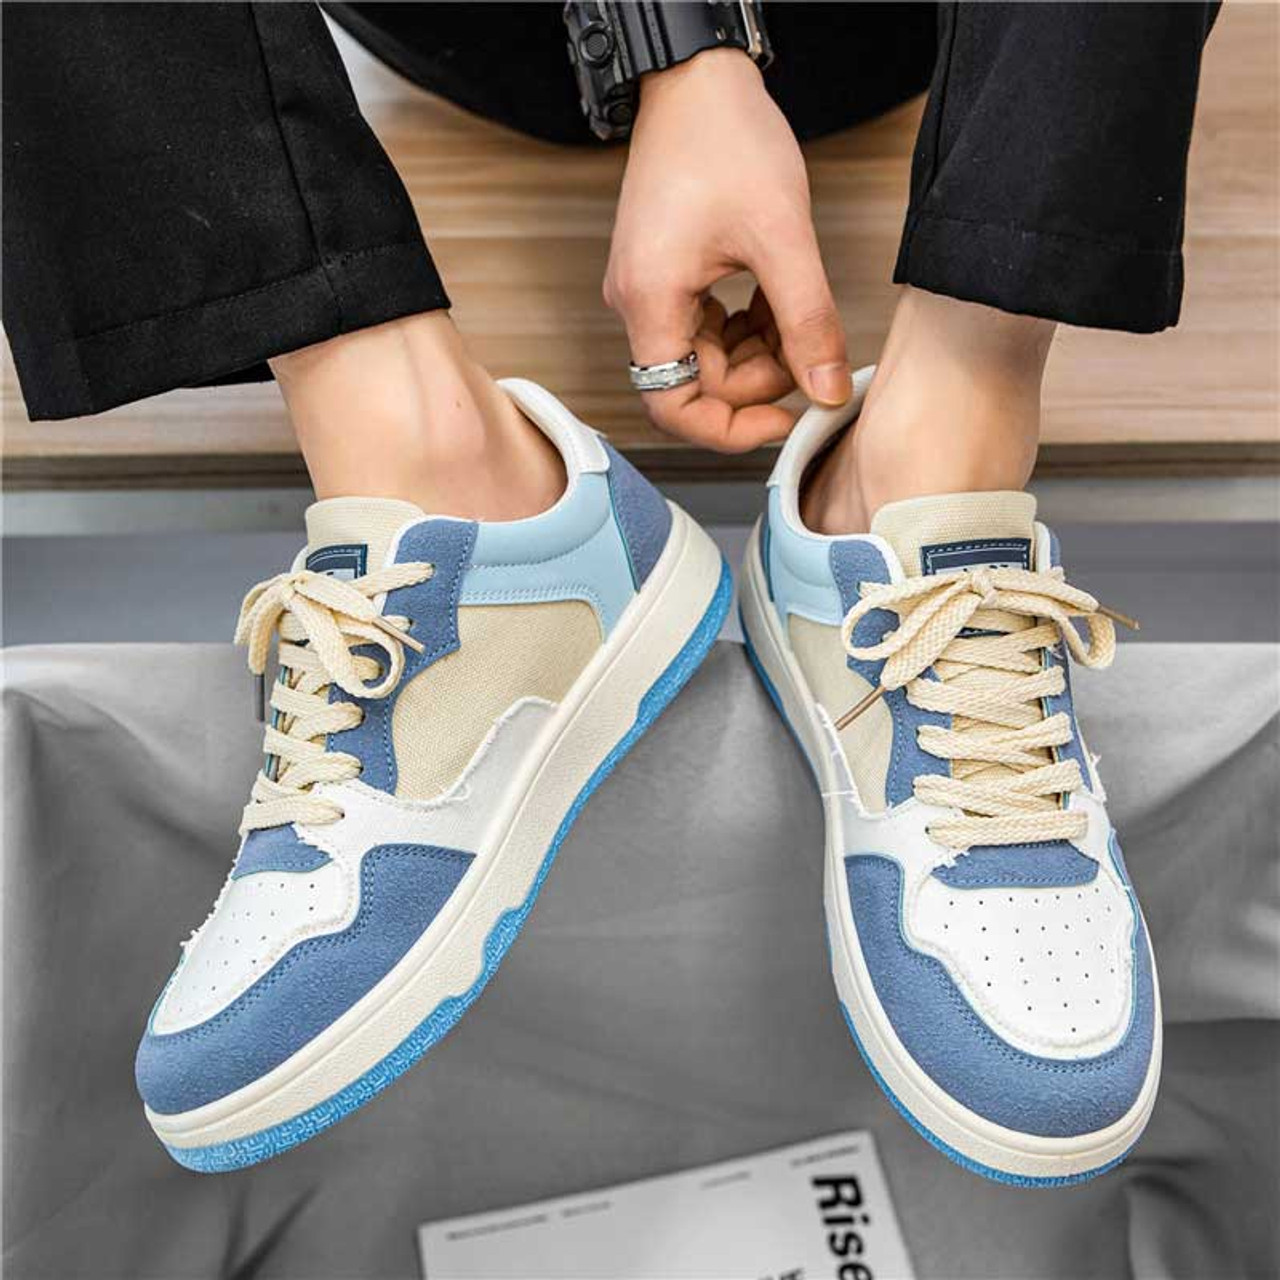 Beige blue suede casual lace up shoe sneaker | Mens sneakers shoes ...